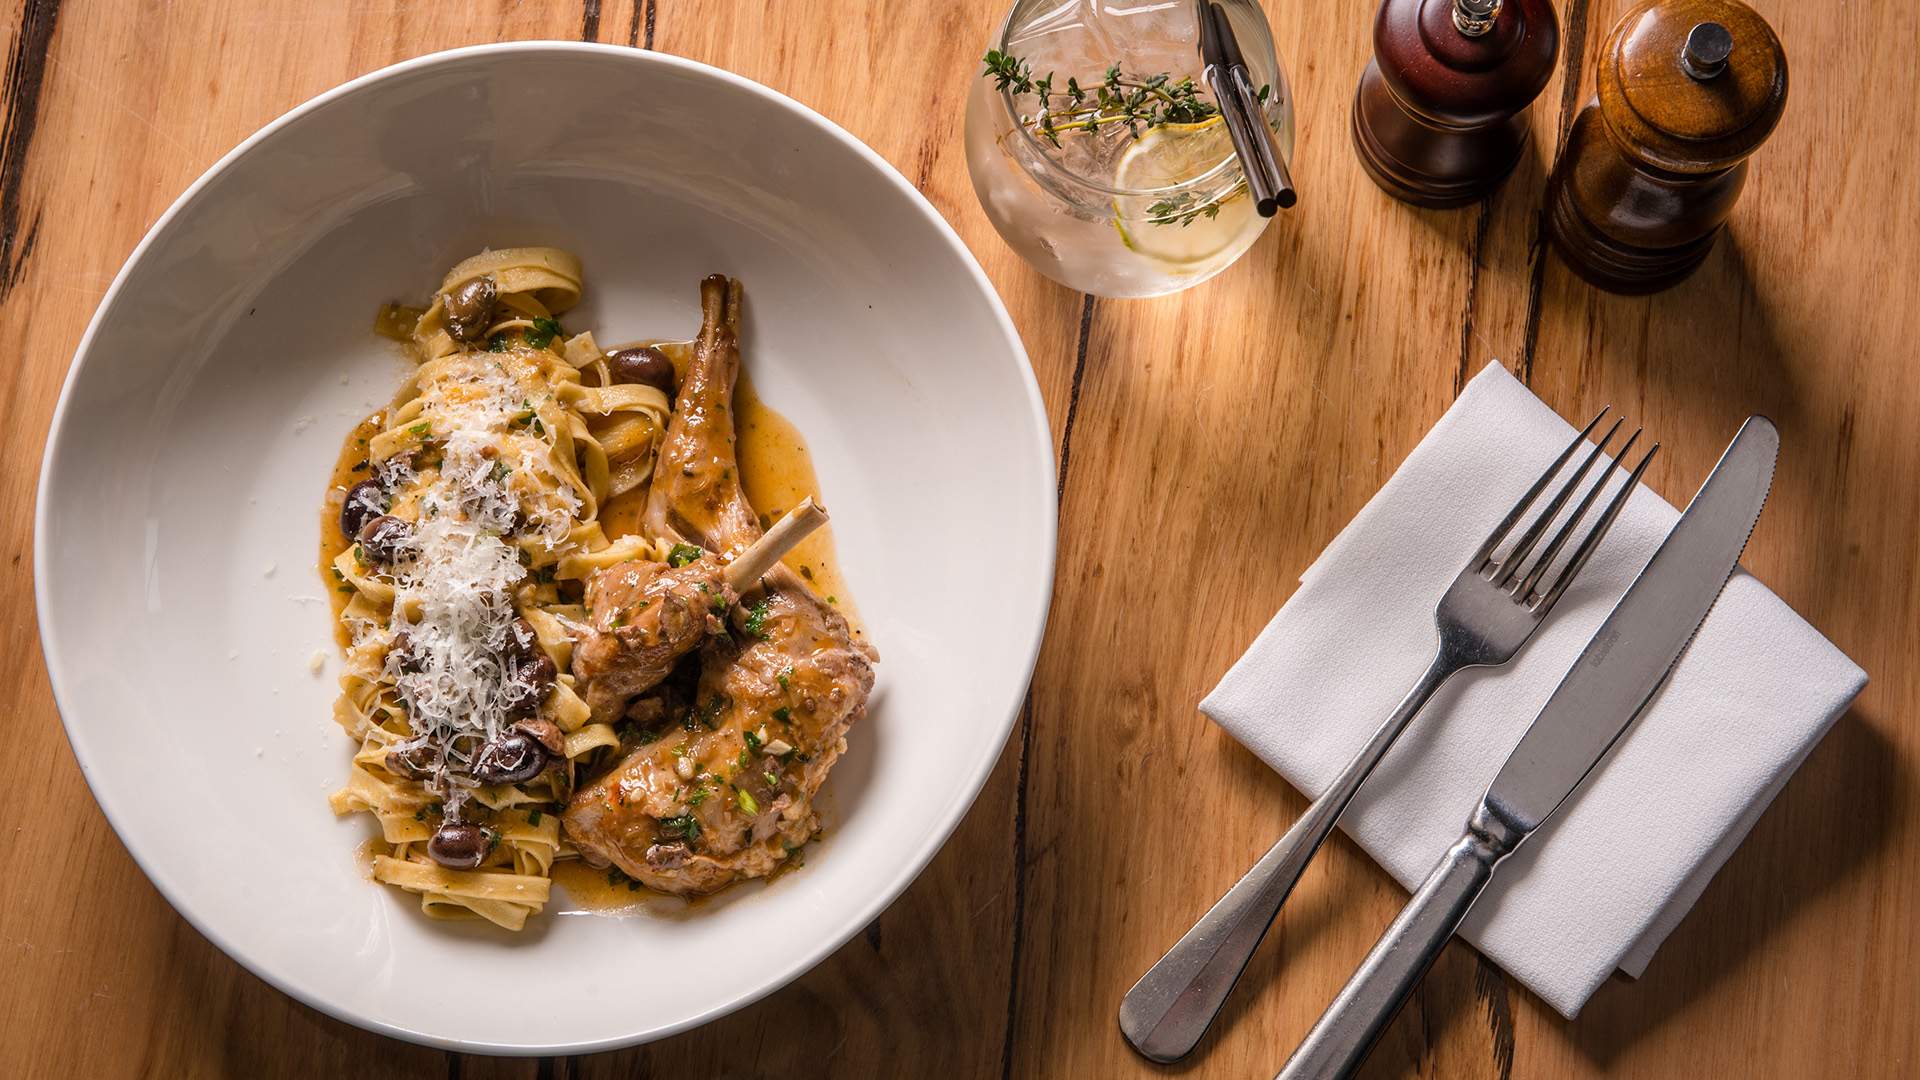 Lello Pasta Bar Is Melbourne's New All-Day Mediterranean Eatery